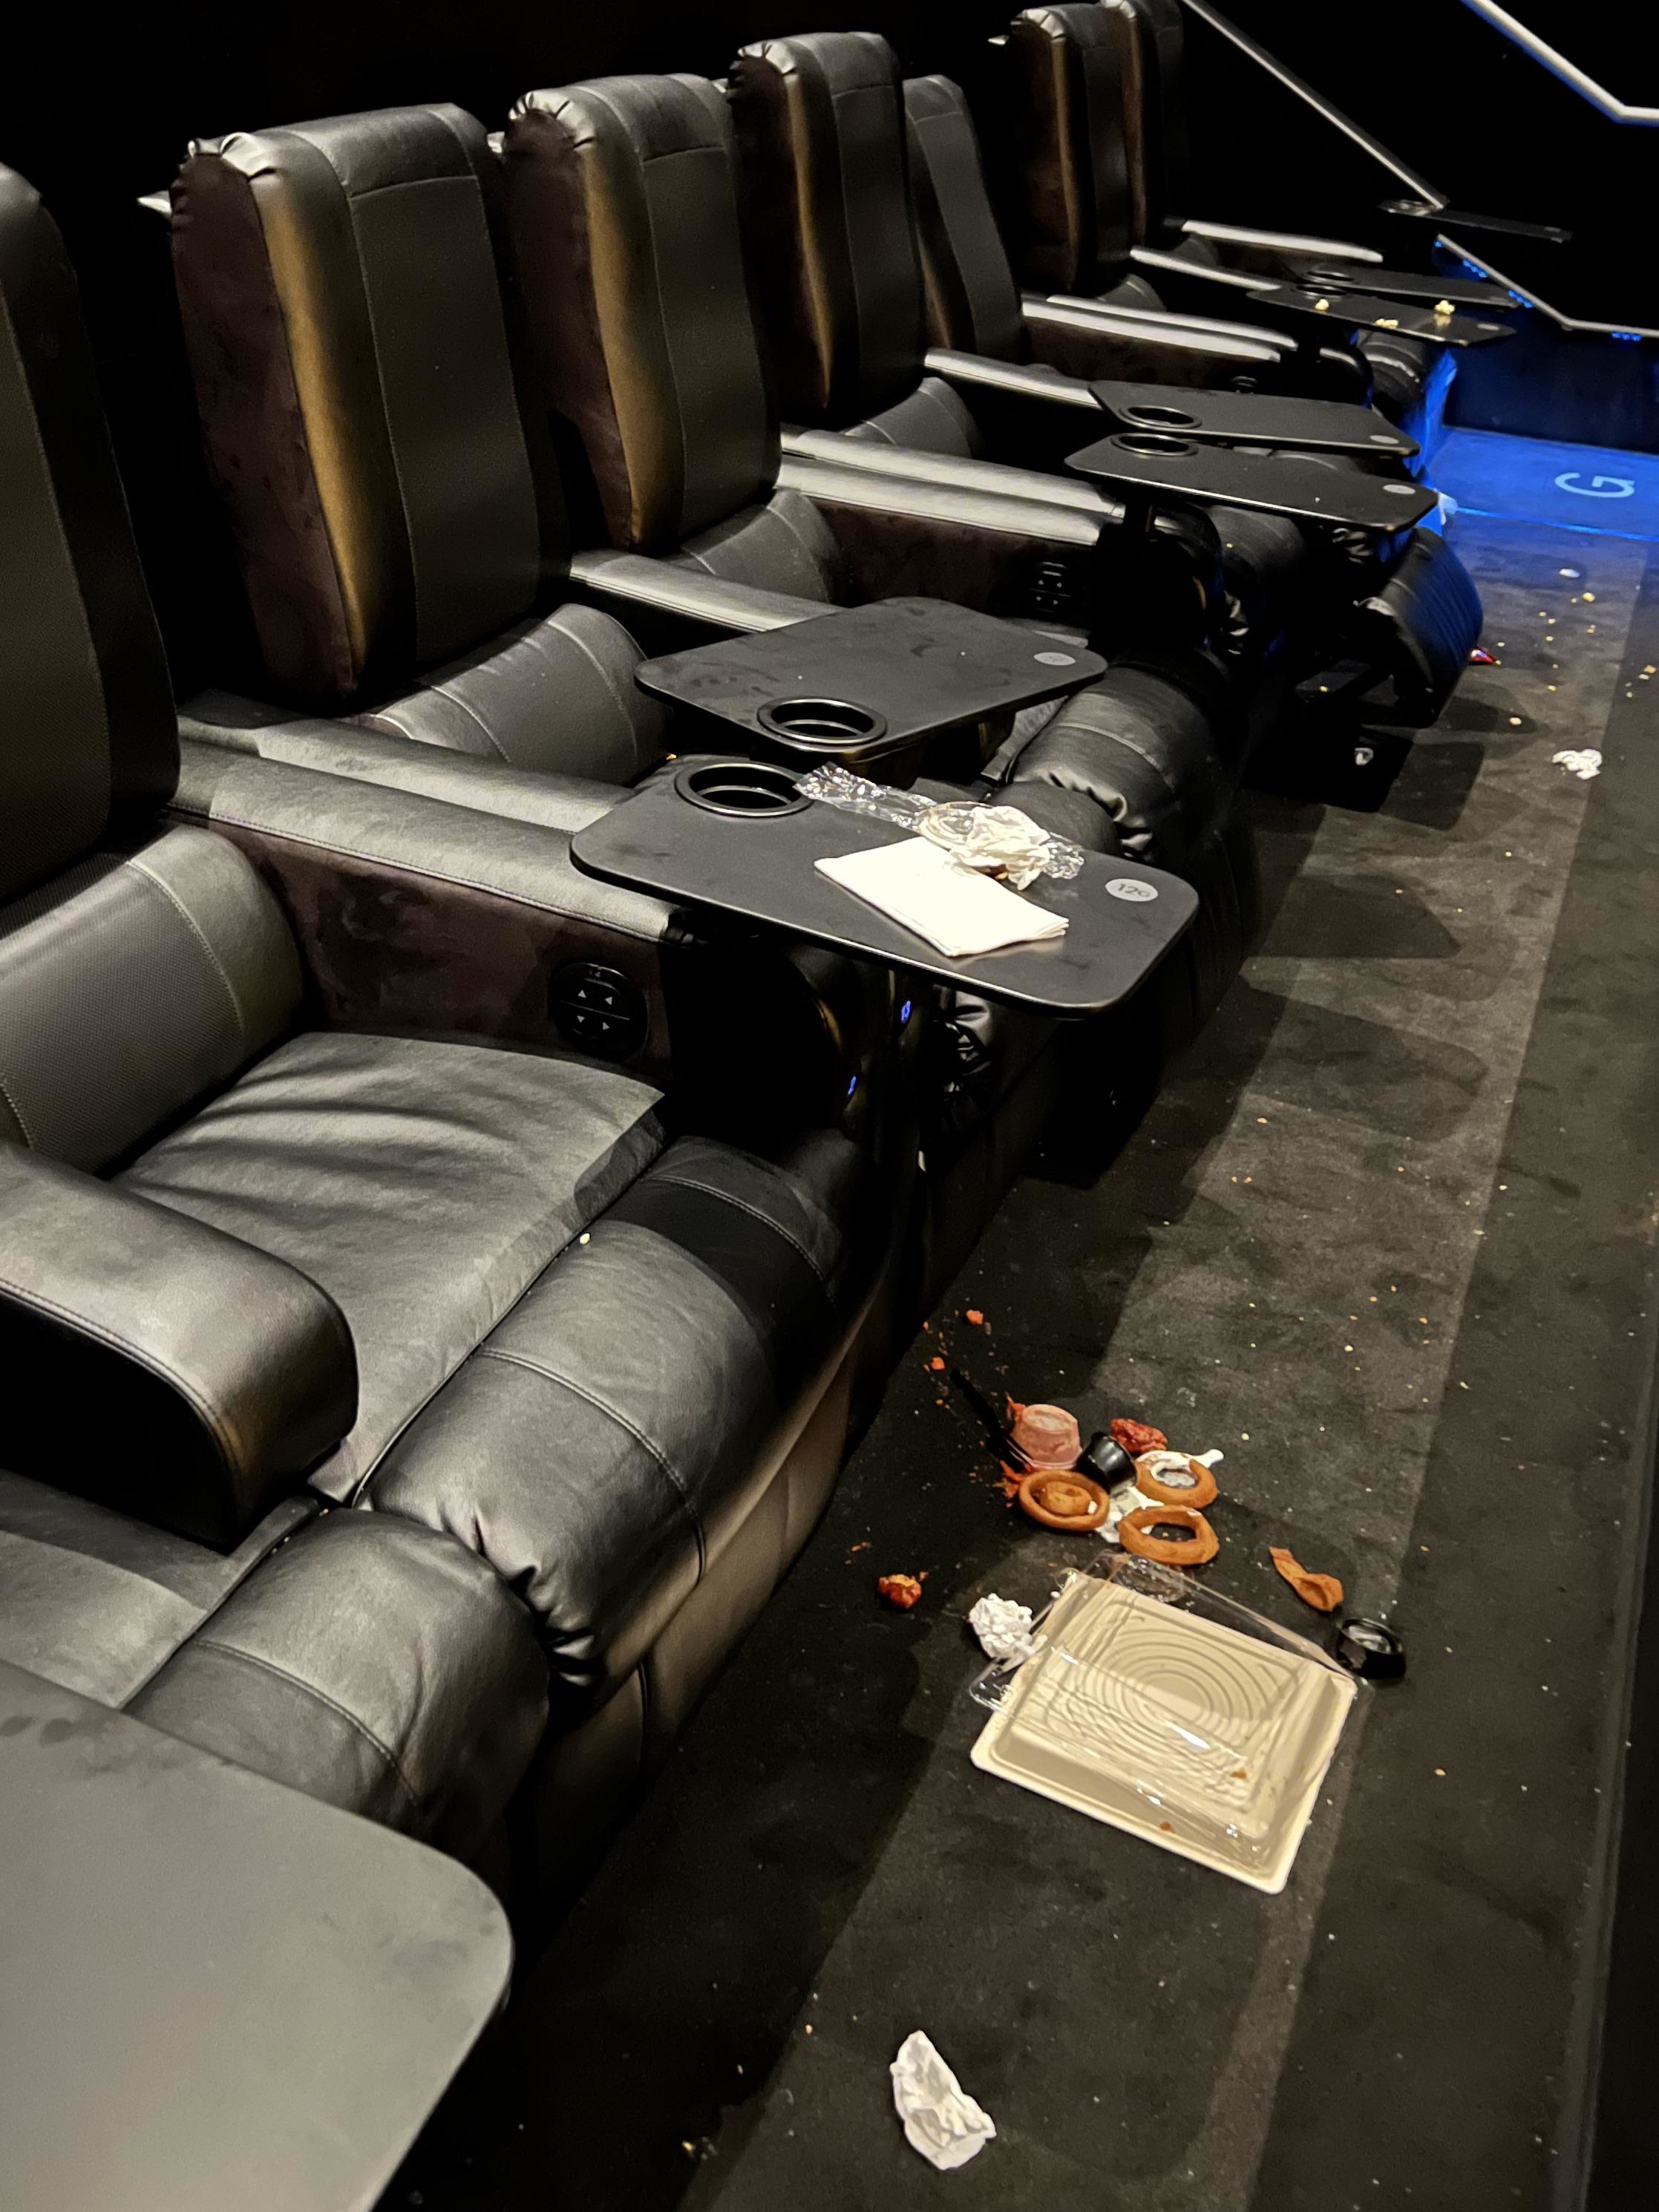 Messy cinema seating with discarded food and paper waste on the floor